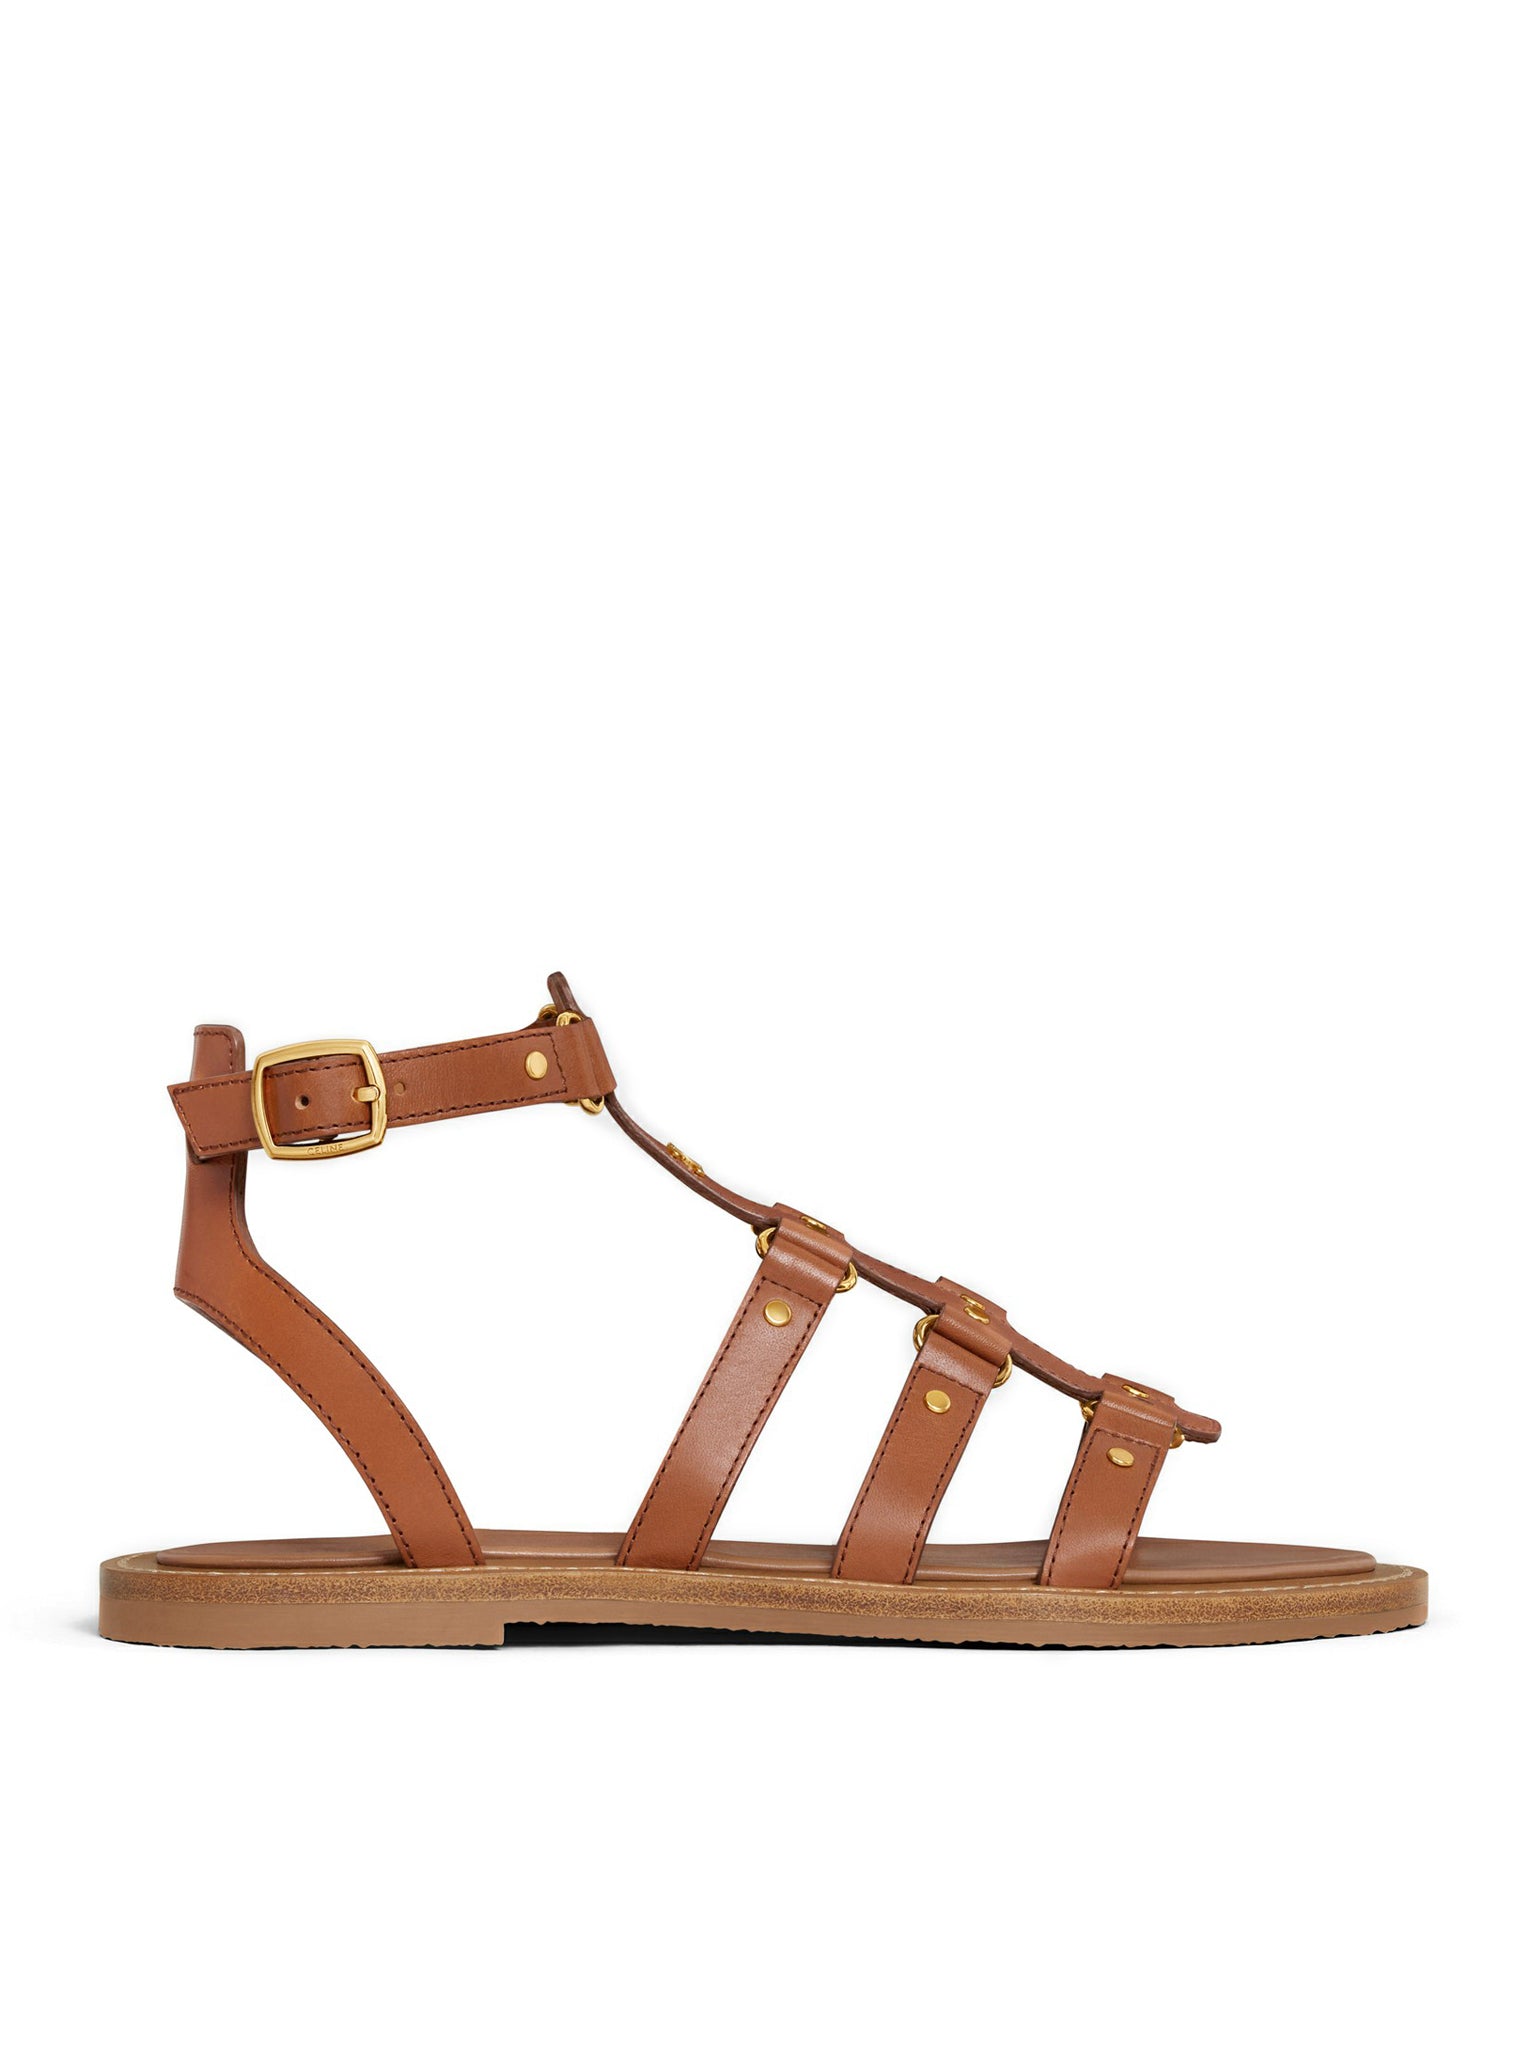 LYMPIA CELINE GLADIATOR STYLE SANDAL IN CALF LEATHER